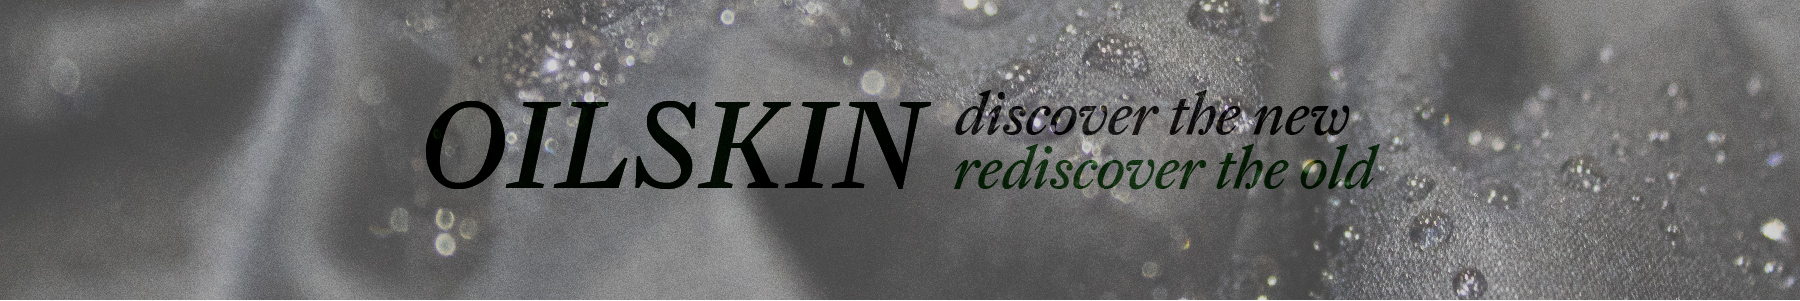 Oilskin - discover the new, rediscover the old